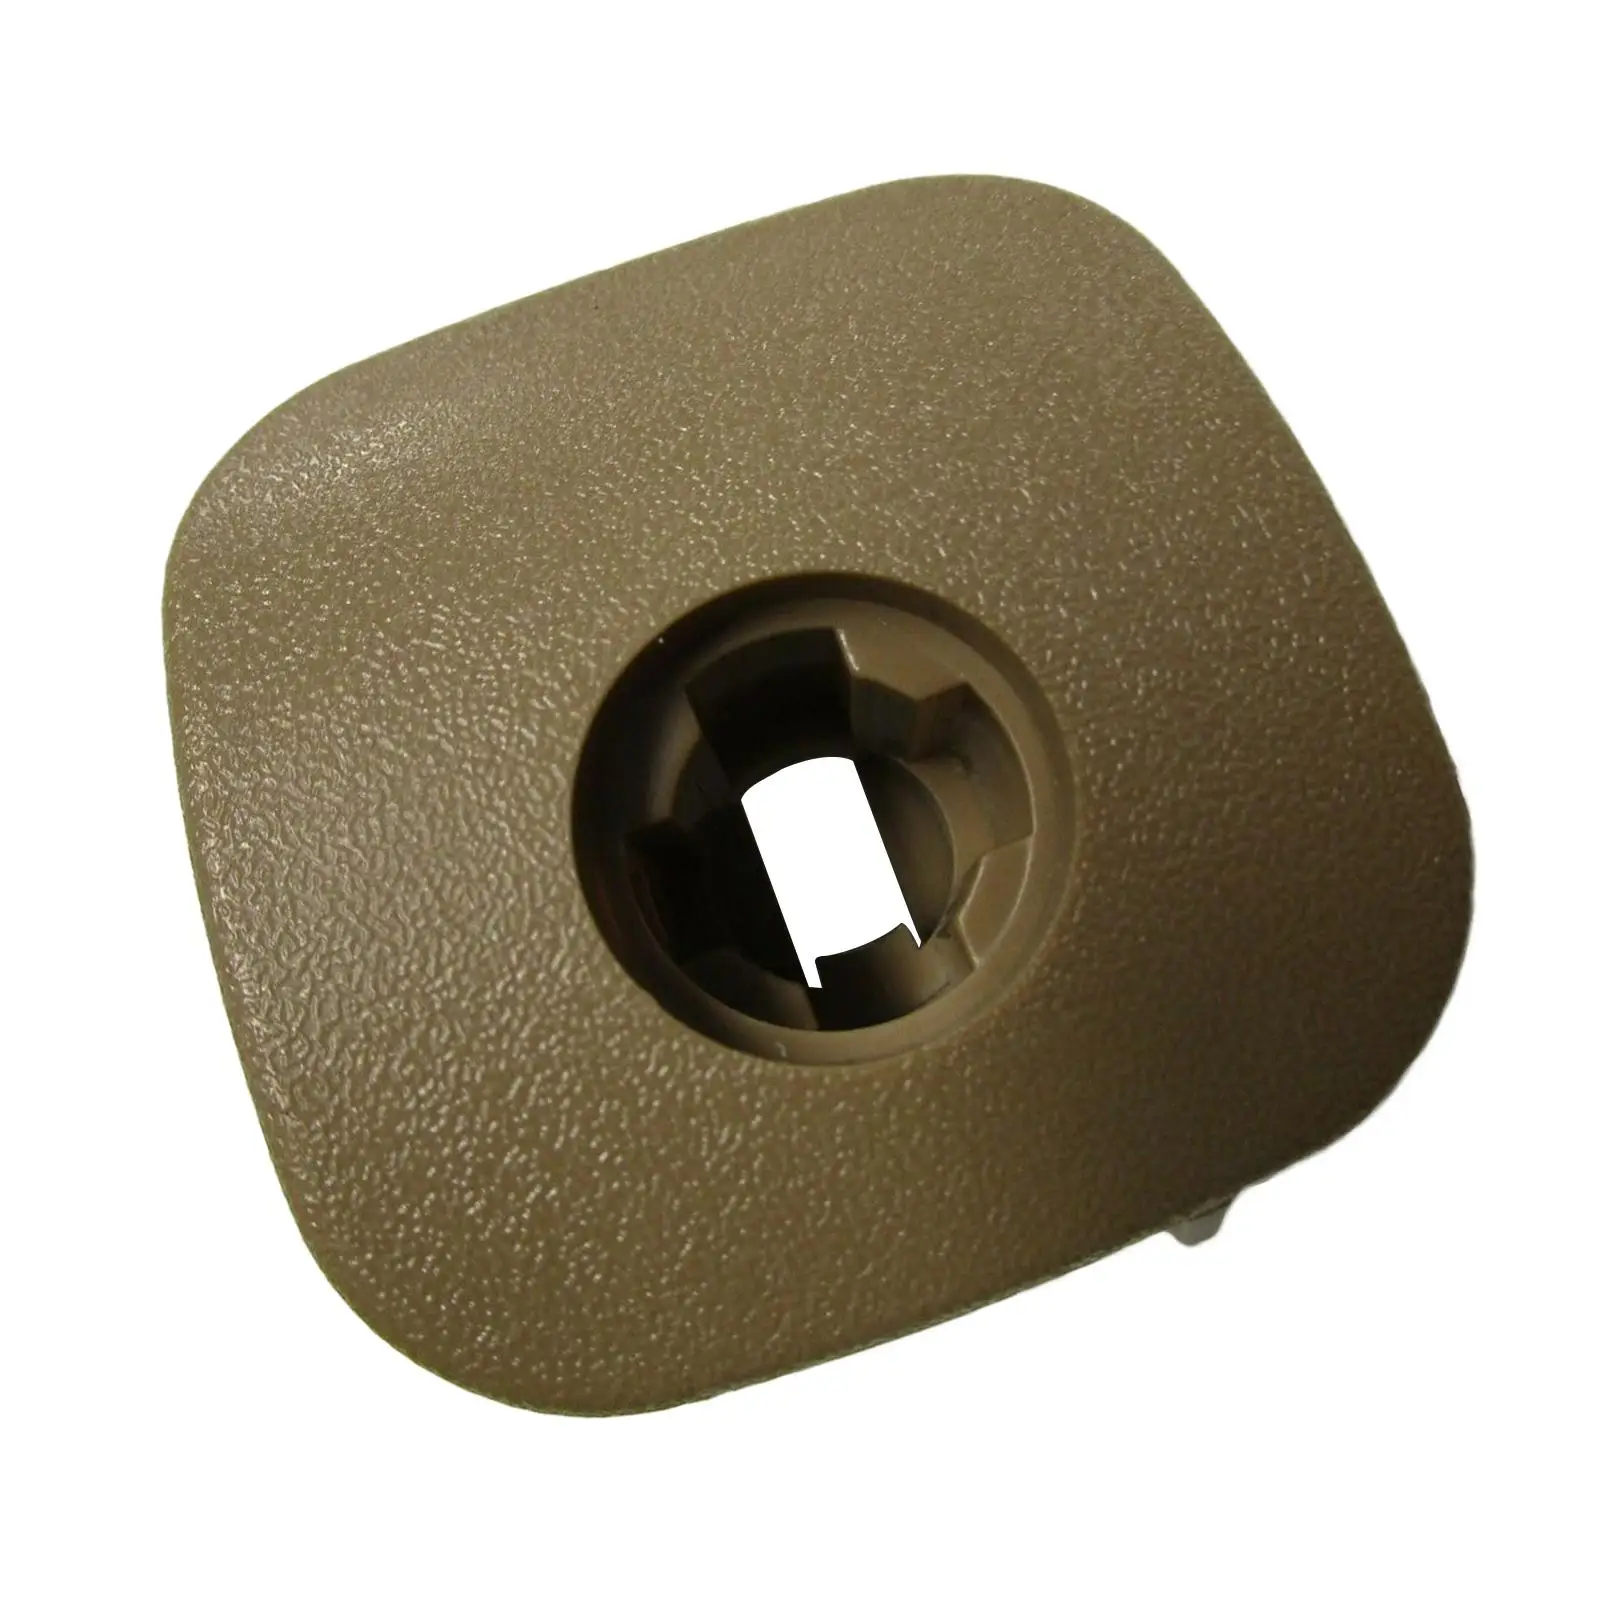  Compartment Door Handles. Accessories Replaces Brown Car Interior  Lock Latch Fits .for  98-04